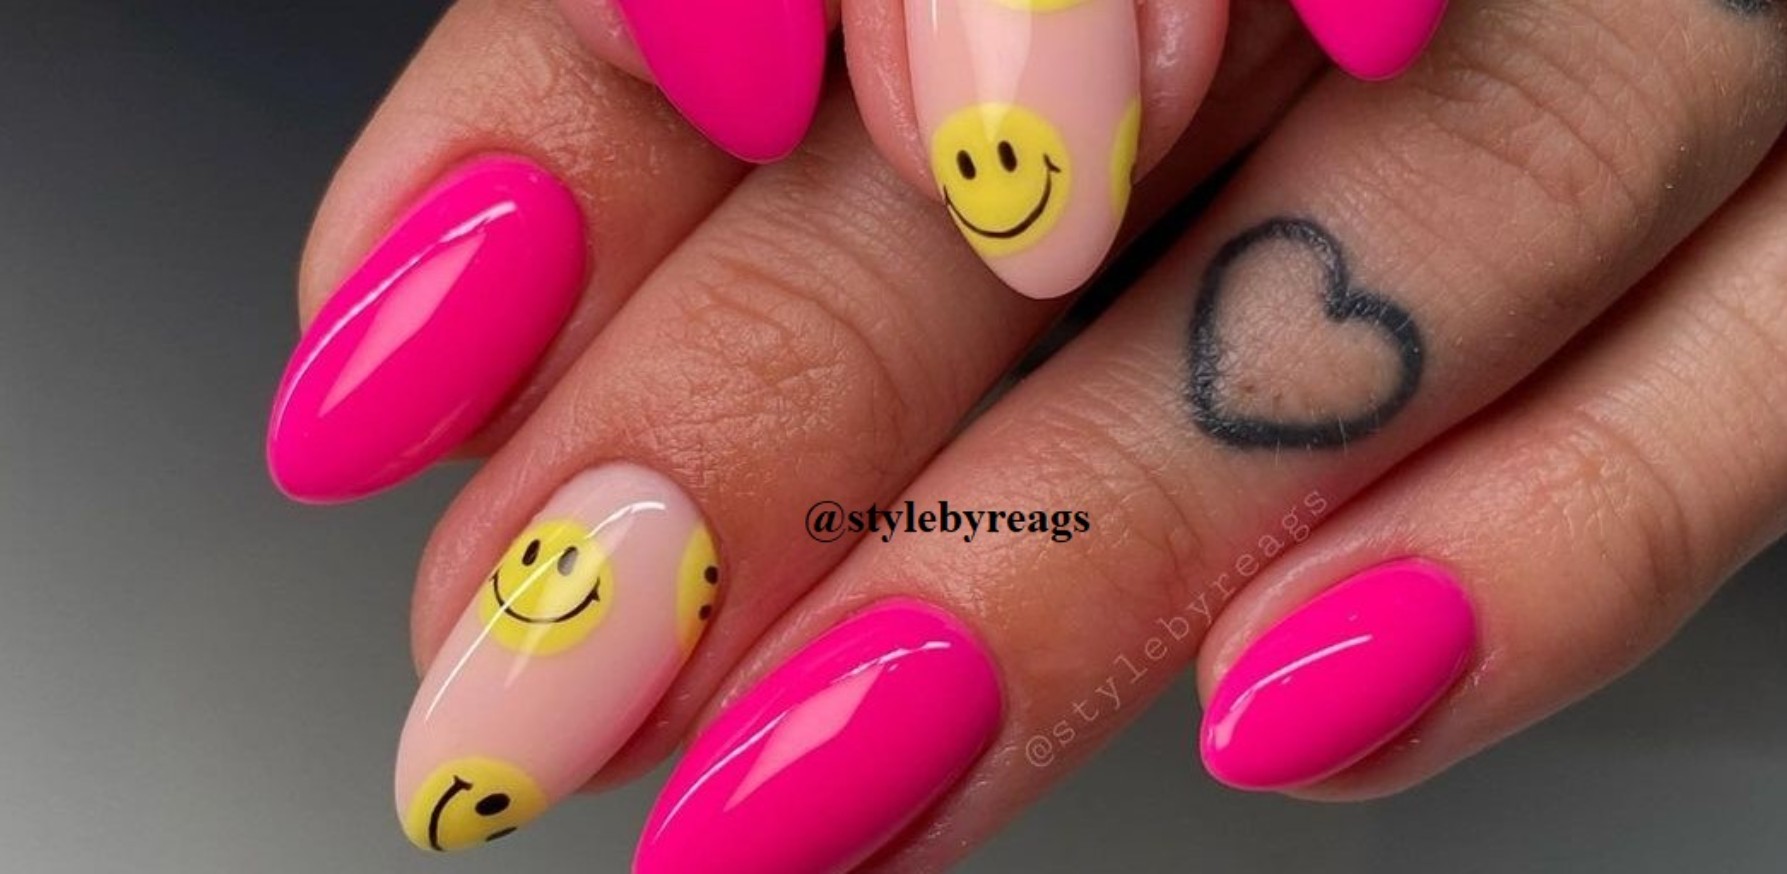 Smiley Face Nails Are The Breath-Taking Nail Trend Of The Year